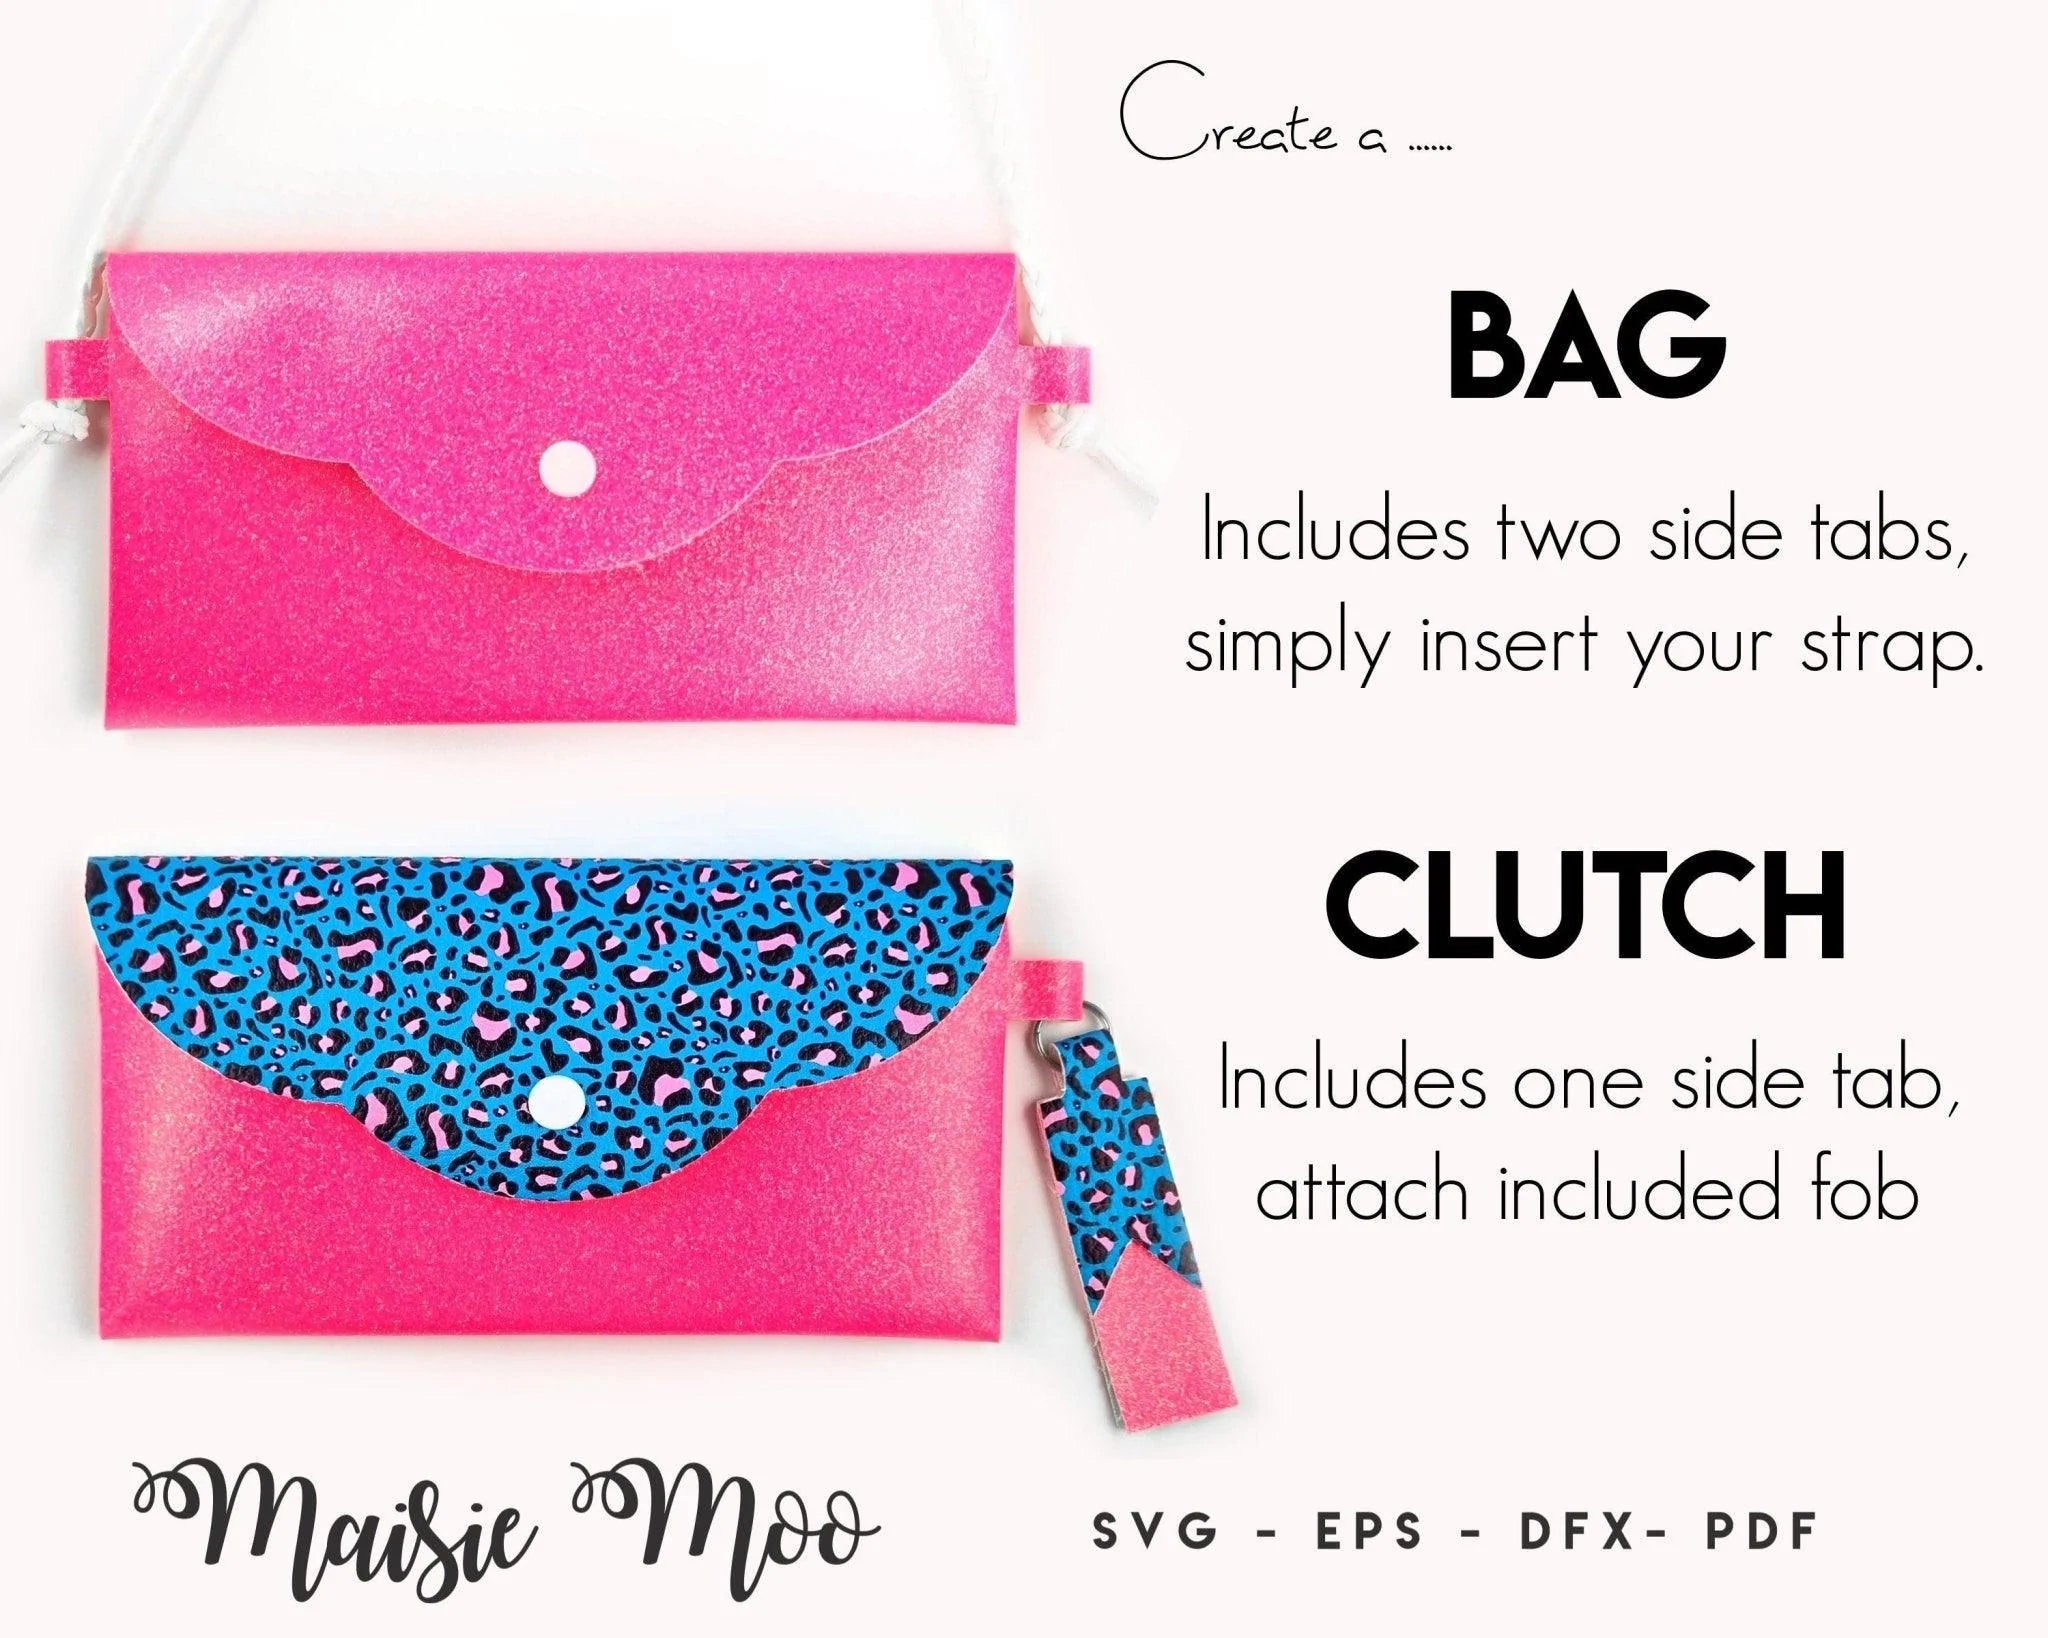 DIY Double Clutch Wallet – diy pouch and bag with sewingtimes